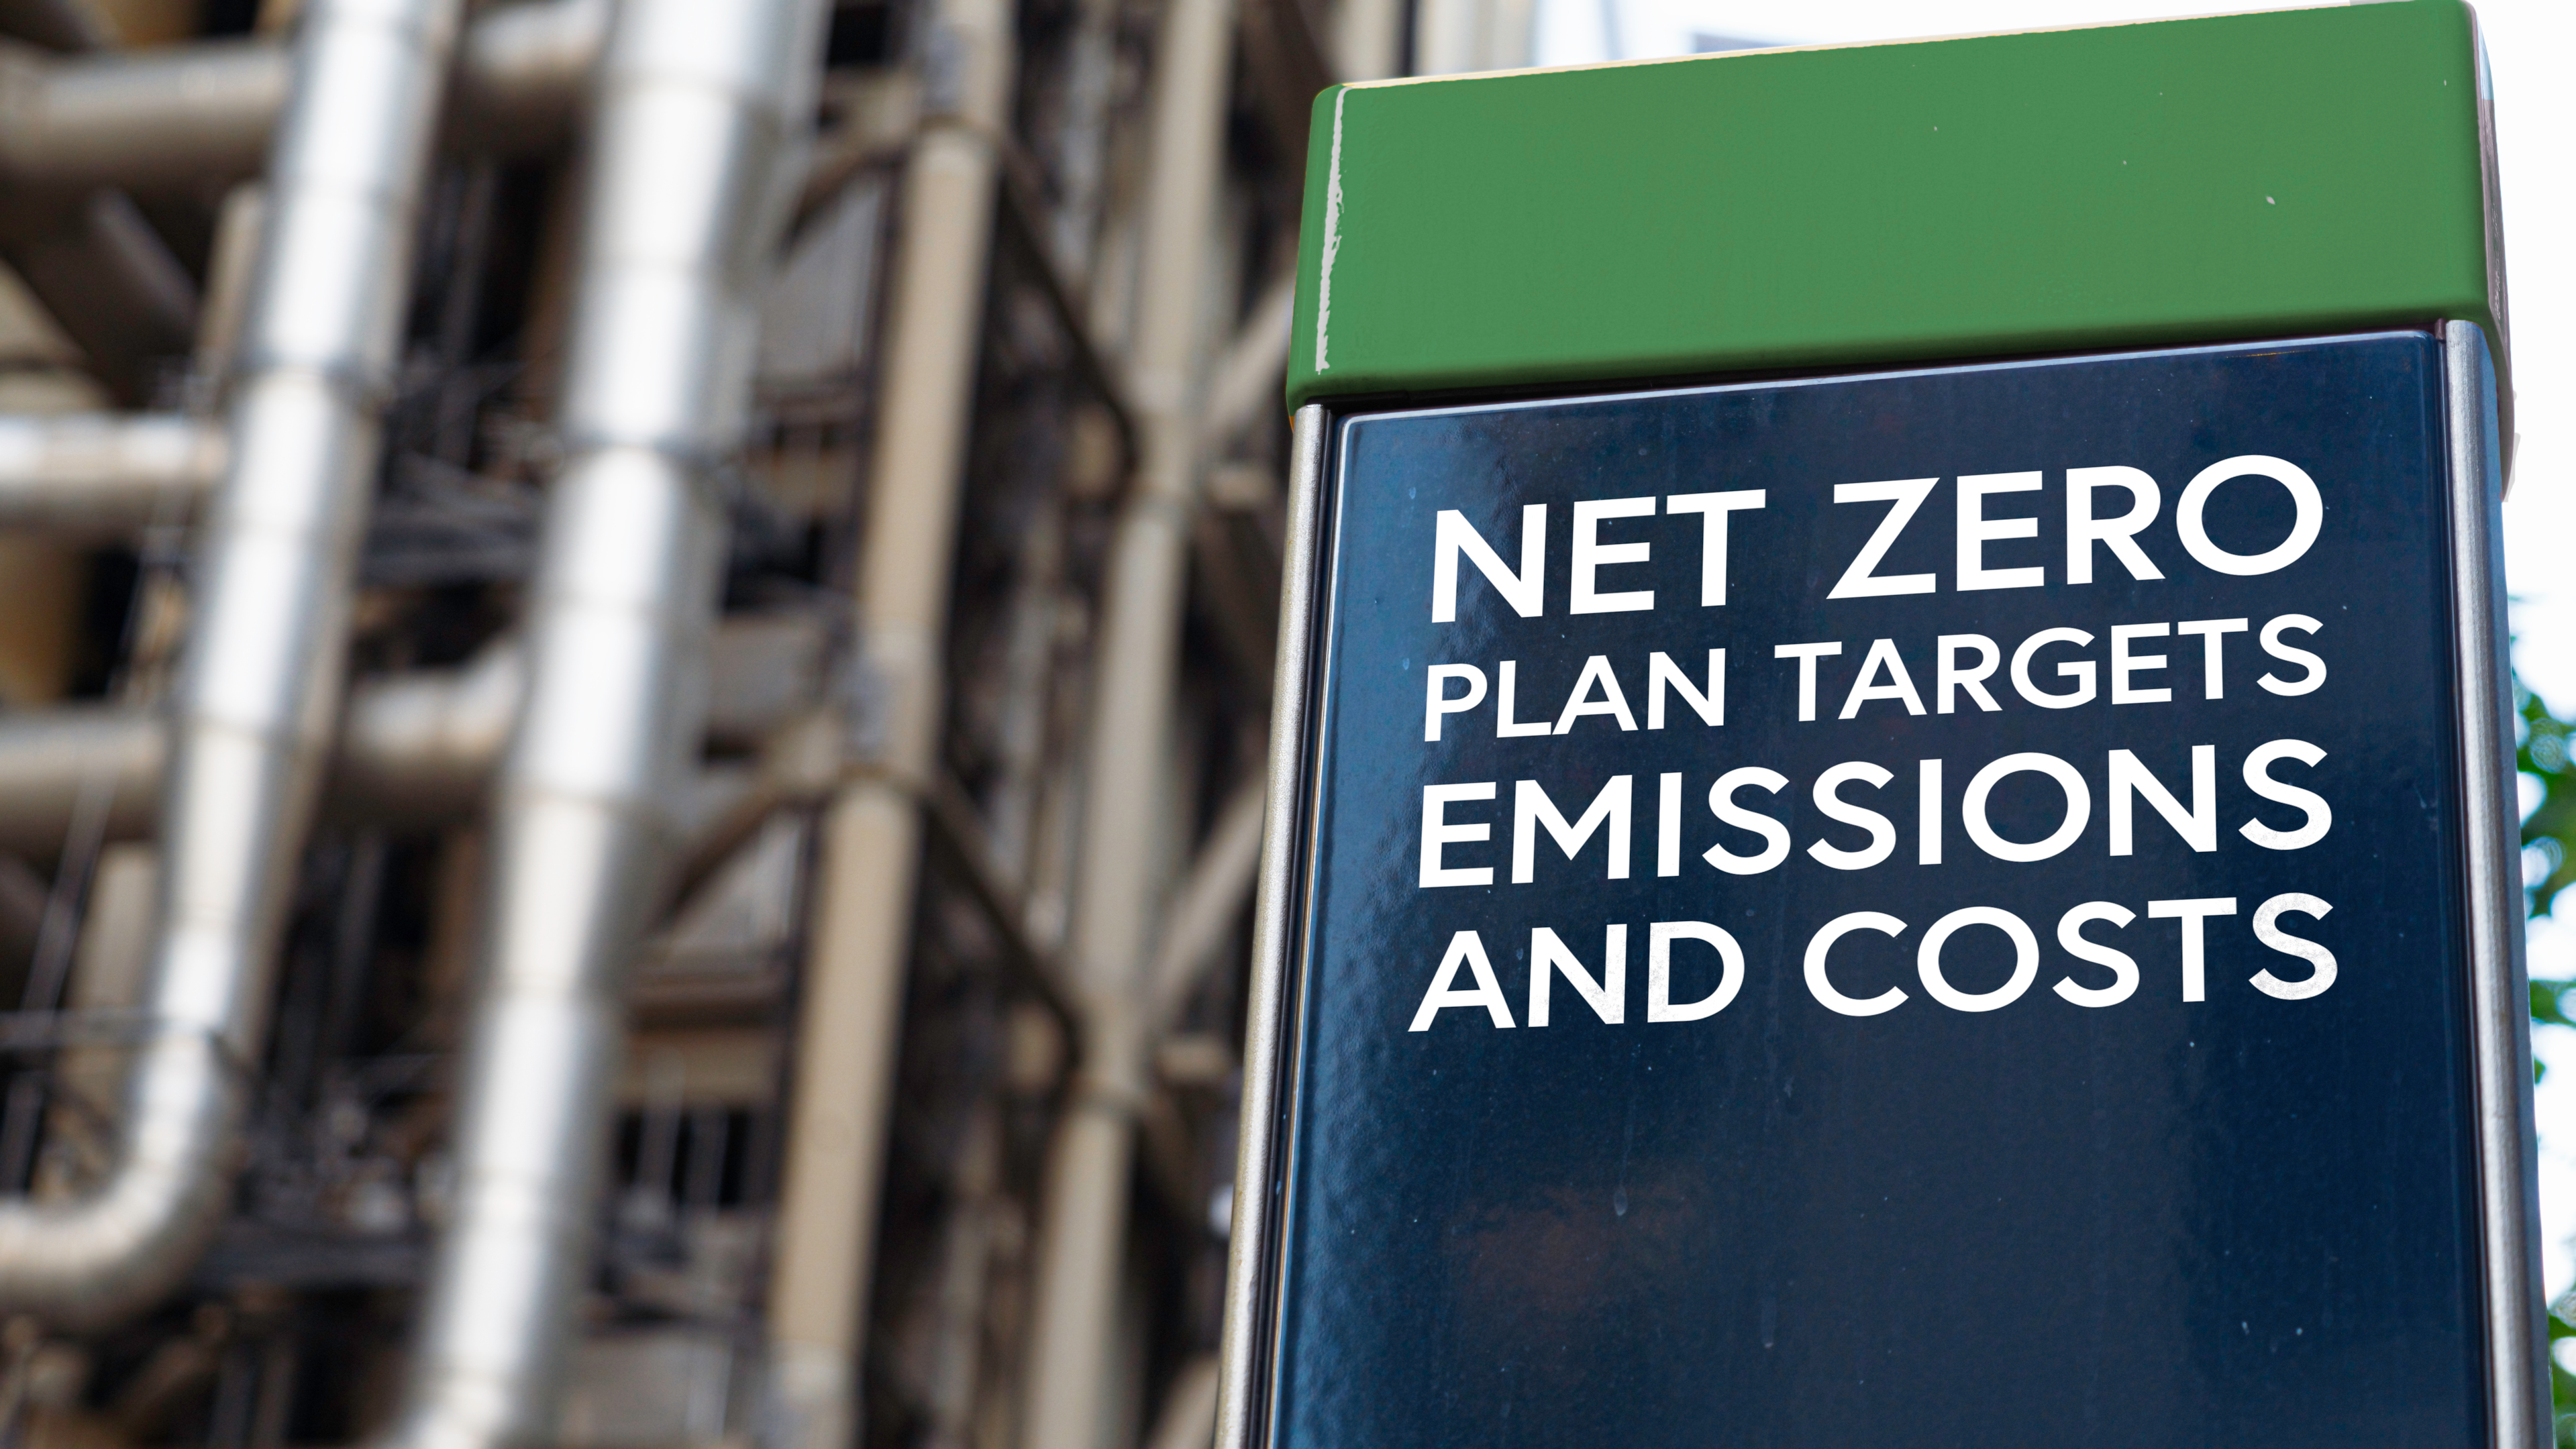 Net Zero Plan Targets Emissions and Costs